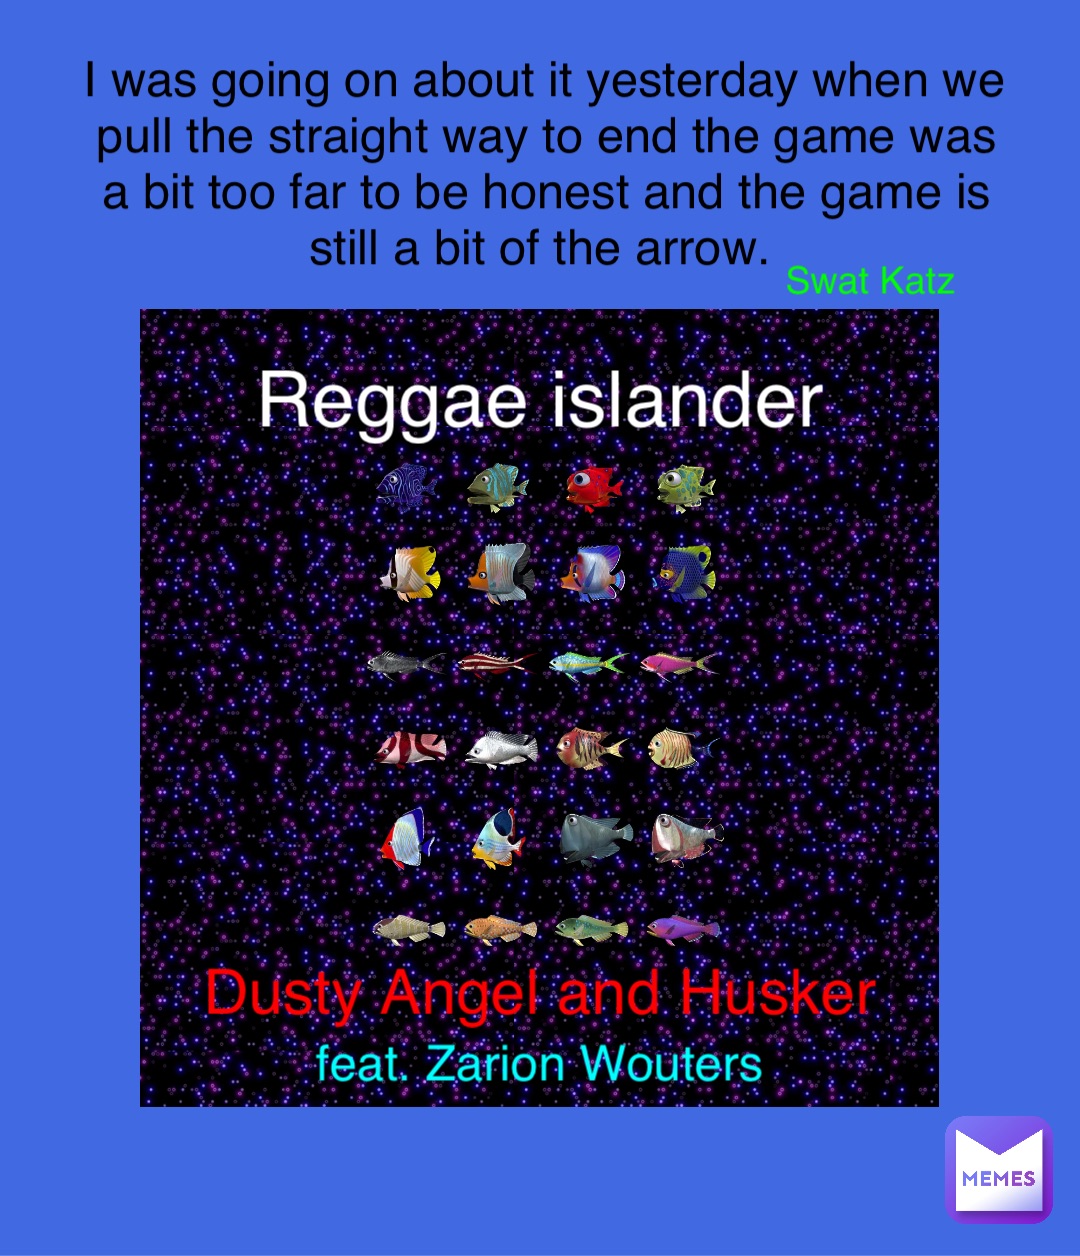 Reggae islander Dusty Angel and Husker feat. Zarion Wouters I was going on about it yesterday when we pull the straight way to end the game was a bit too far to be honest and the game is still a bit of the arrow. Swat Katz